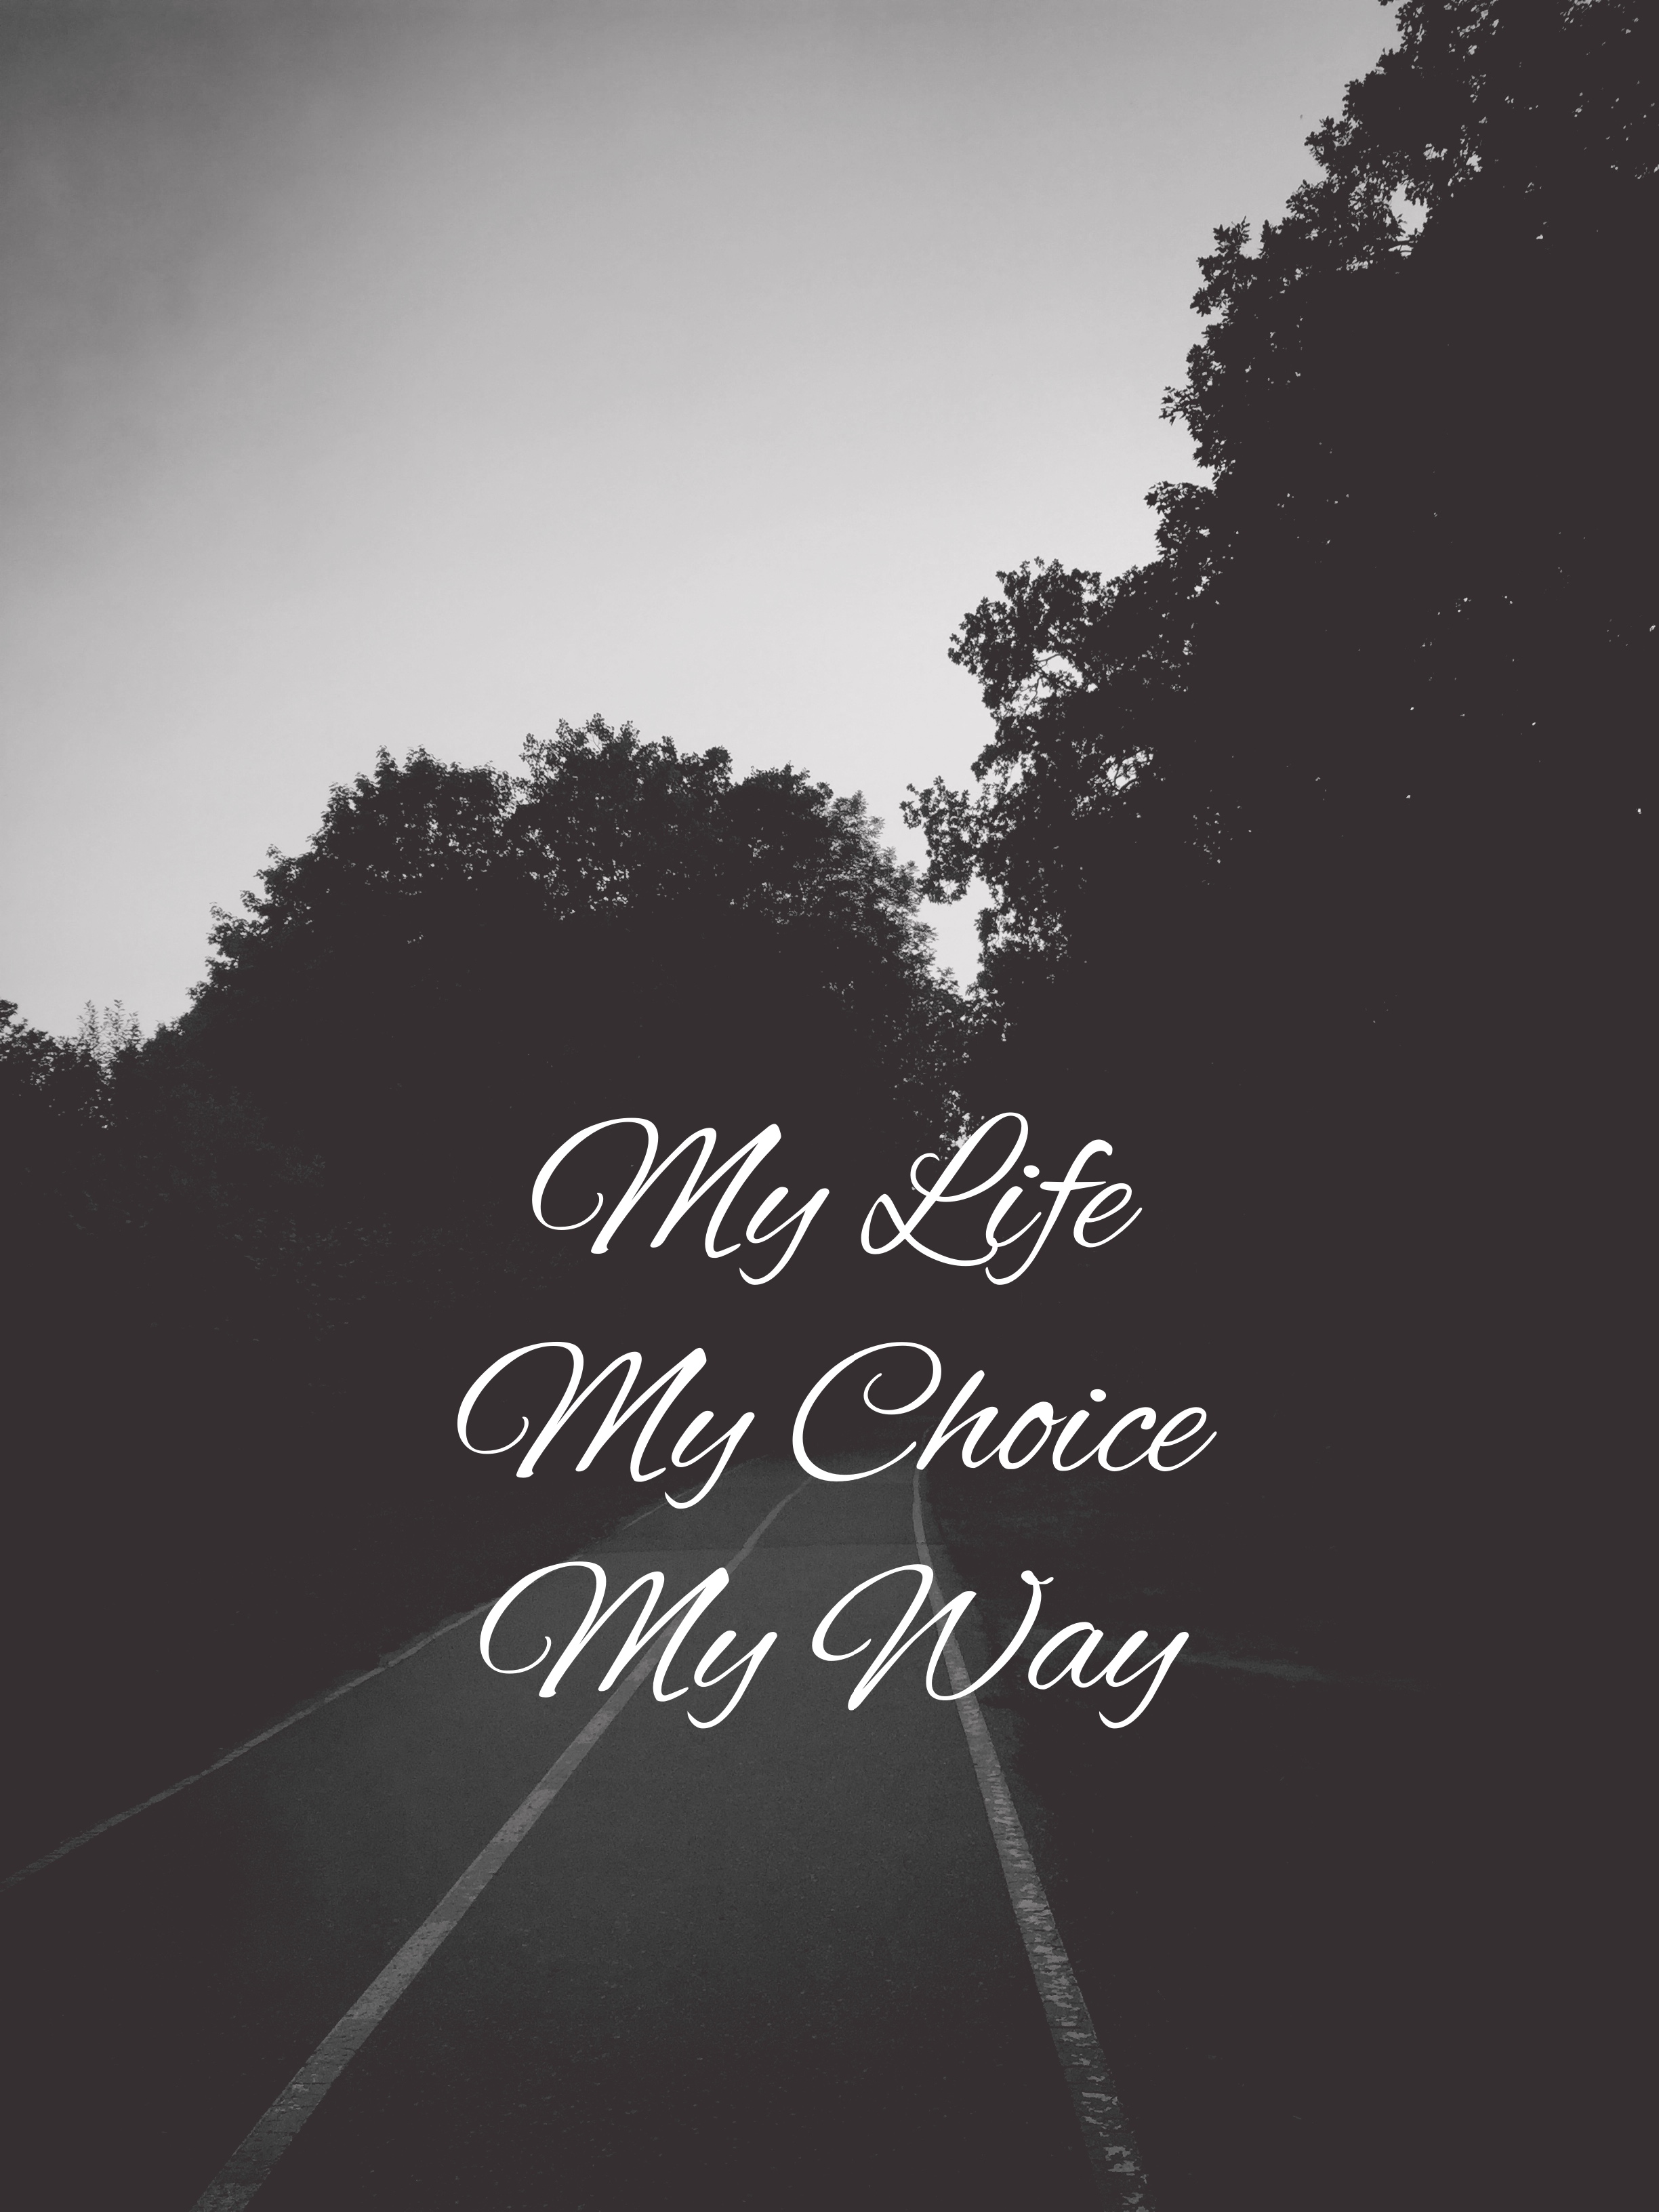 words, quotation, bw, text, quote, chb, inscription, road, path, way